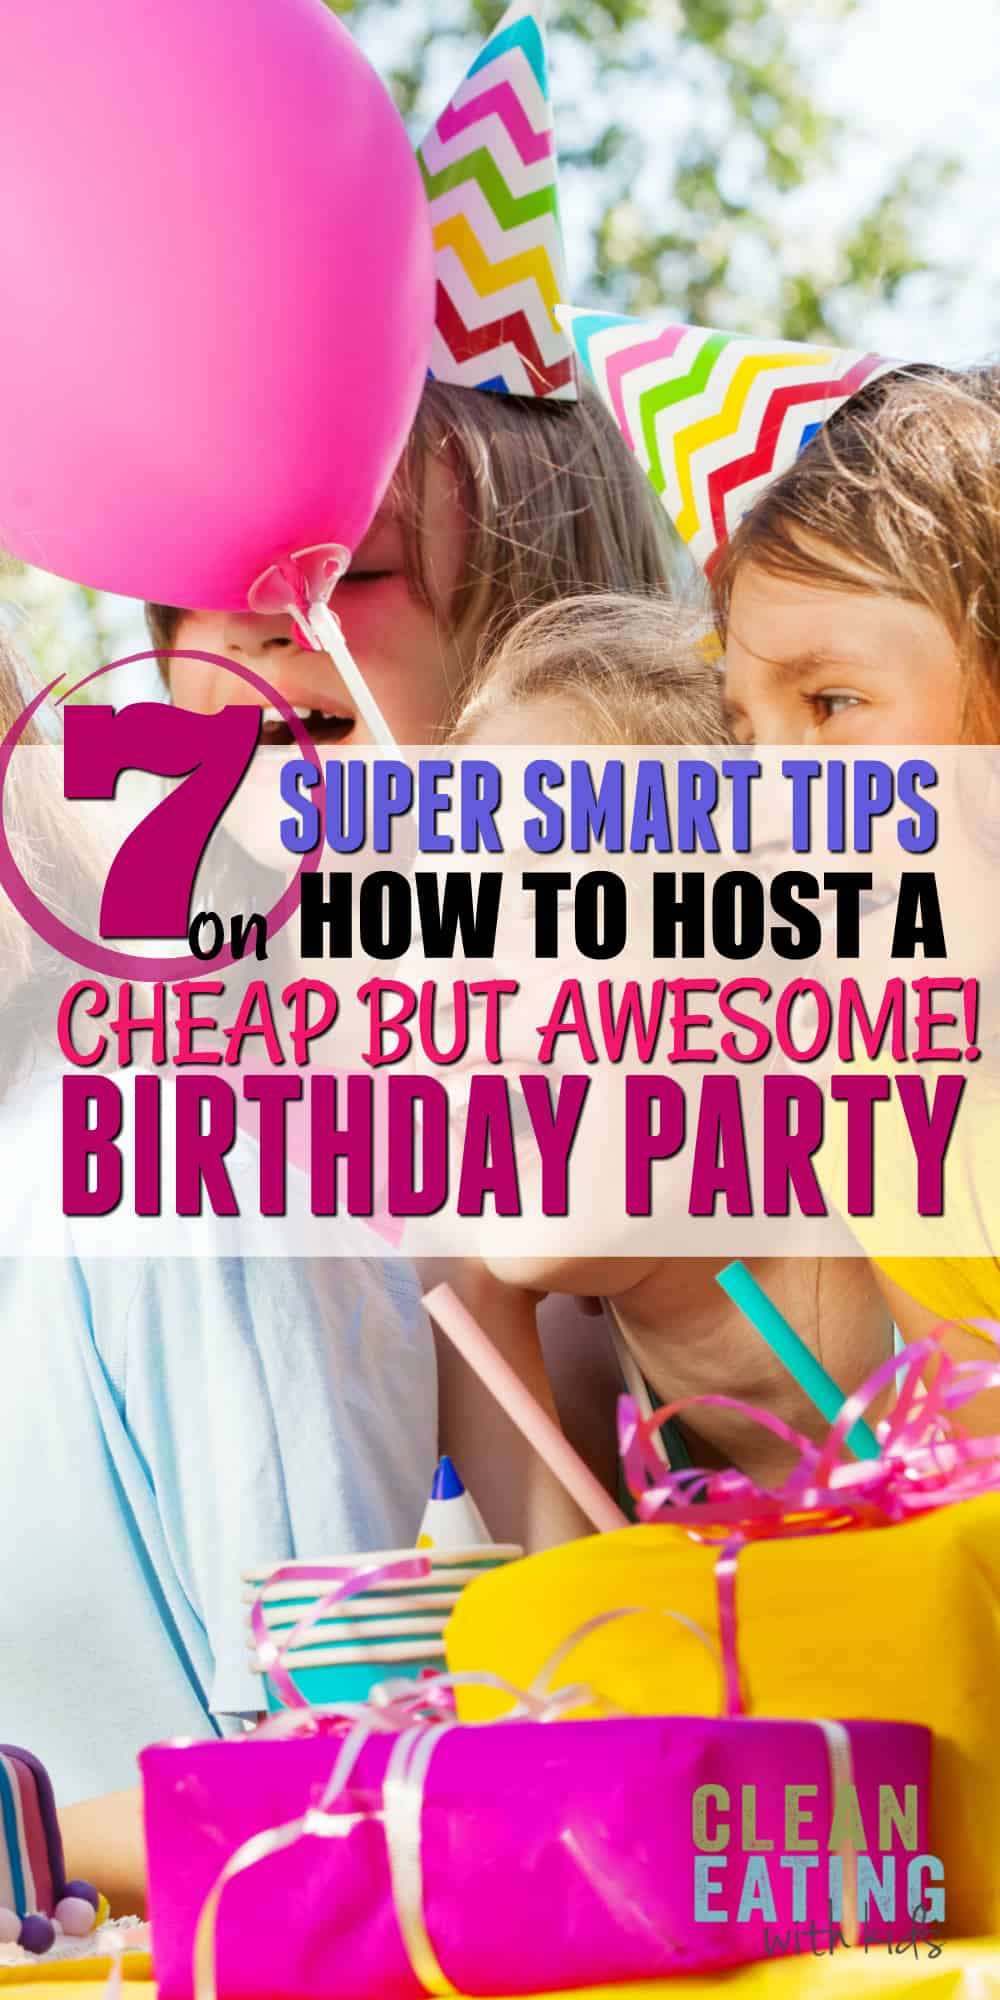 How to Host a Cheap but Amazing Birthday Party that your child will remember! 